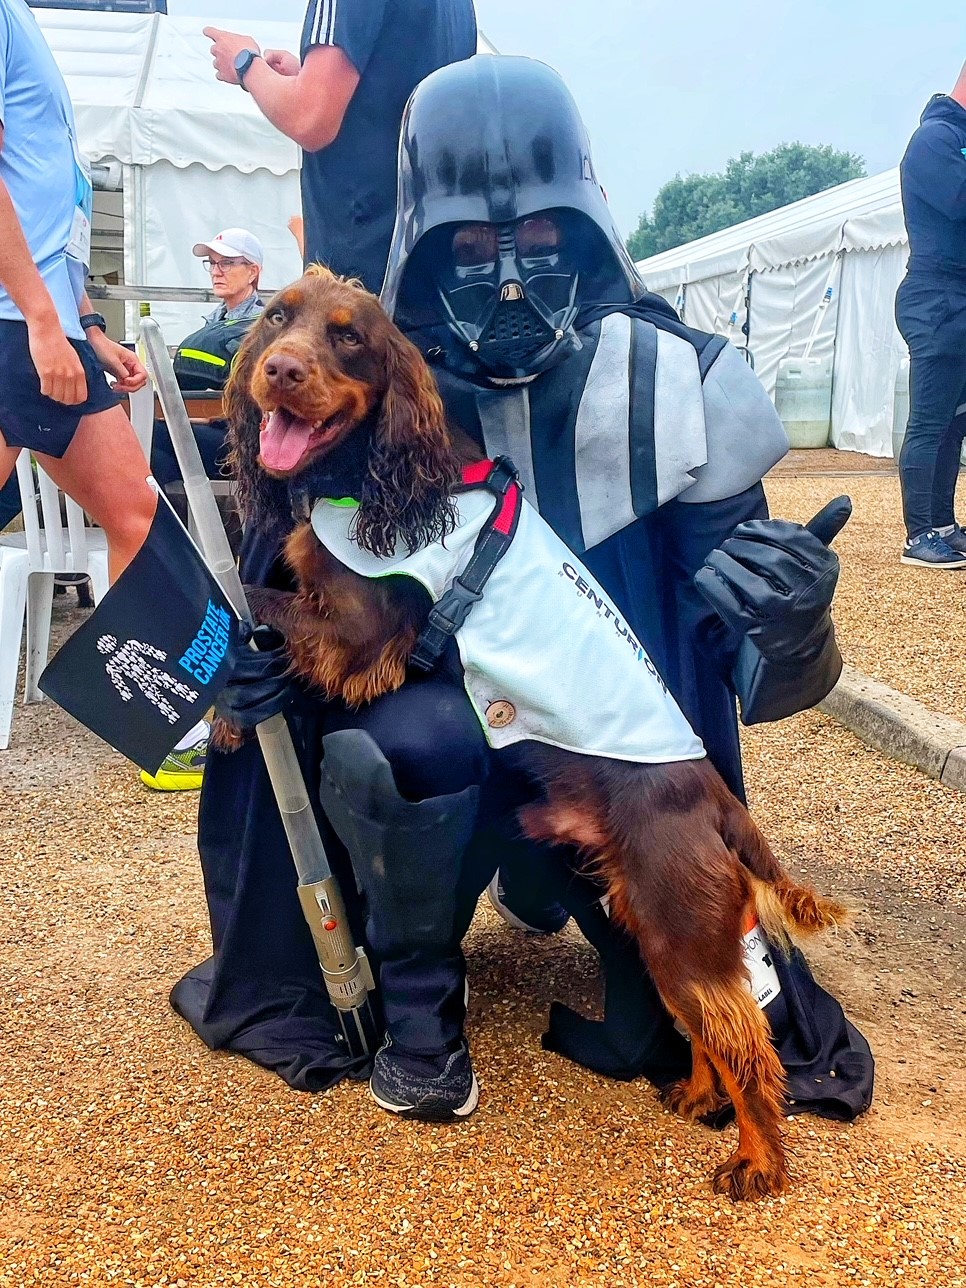 Simon Best, dressed as Darth Vader, meets a dog at a previous fundraising run